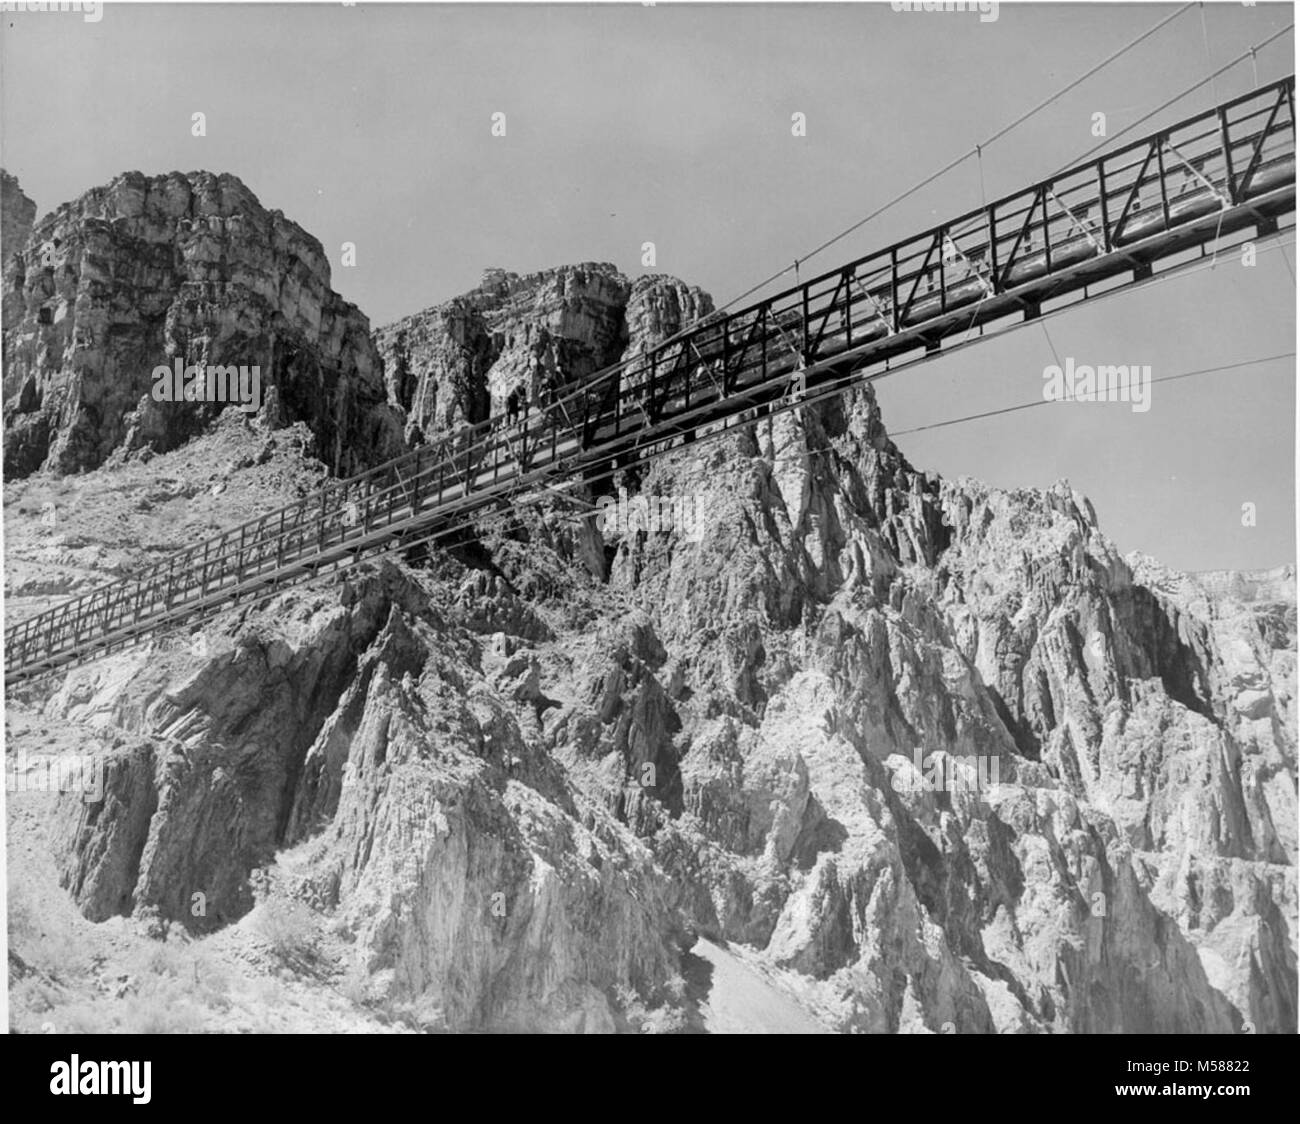 Grand Canyon Historic Kaibab Trail Suspension Bridge. PAINTING CREW AT KAIBAB SUSPENSION BRIDGE - CONTRACT WORK DONE J.A. BRIDGES, PAINTING CONTRACTOR OF PHOENIX, ARIZONA.  WORK BEGAN JUNE 26, FINISHED JULY 1.  .  CIRCA 1952. Stock Photo